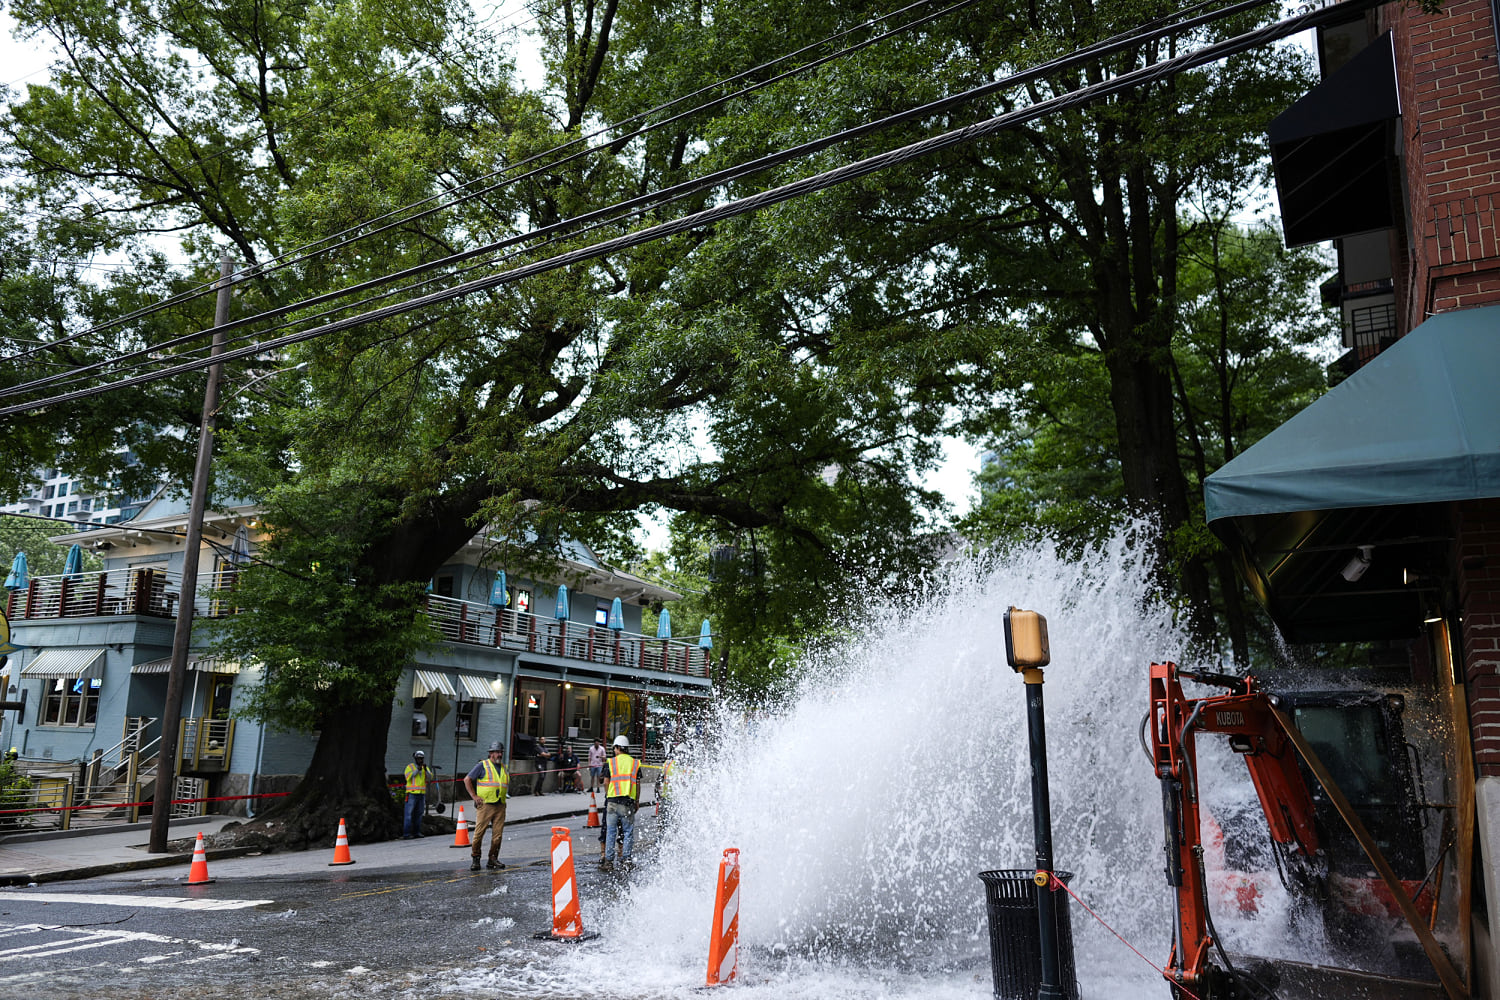 Burst pipes disrupt Atlanta water service, forcing business closings and boil water notice